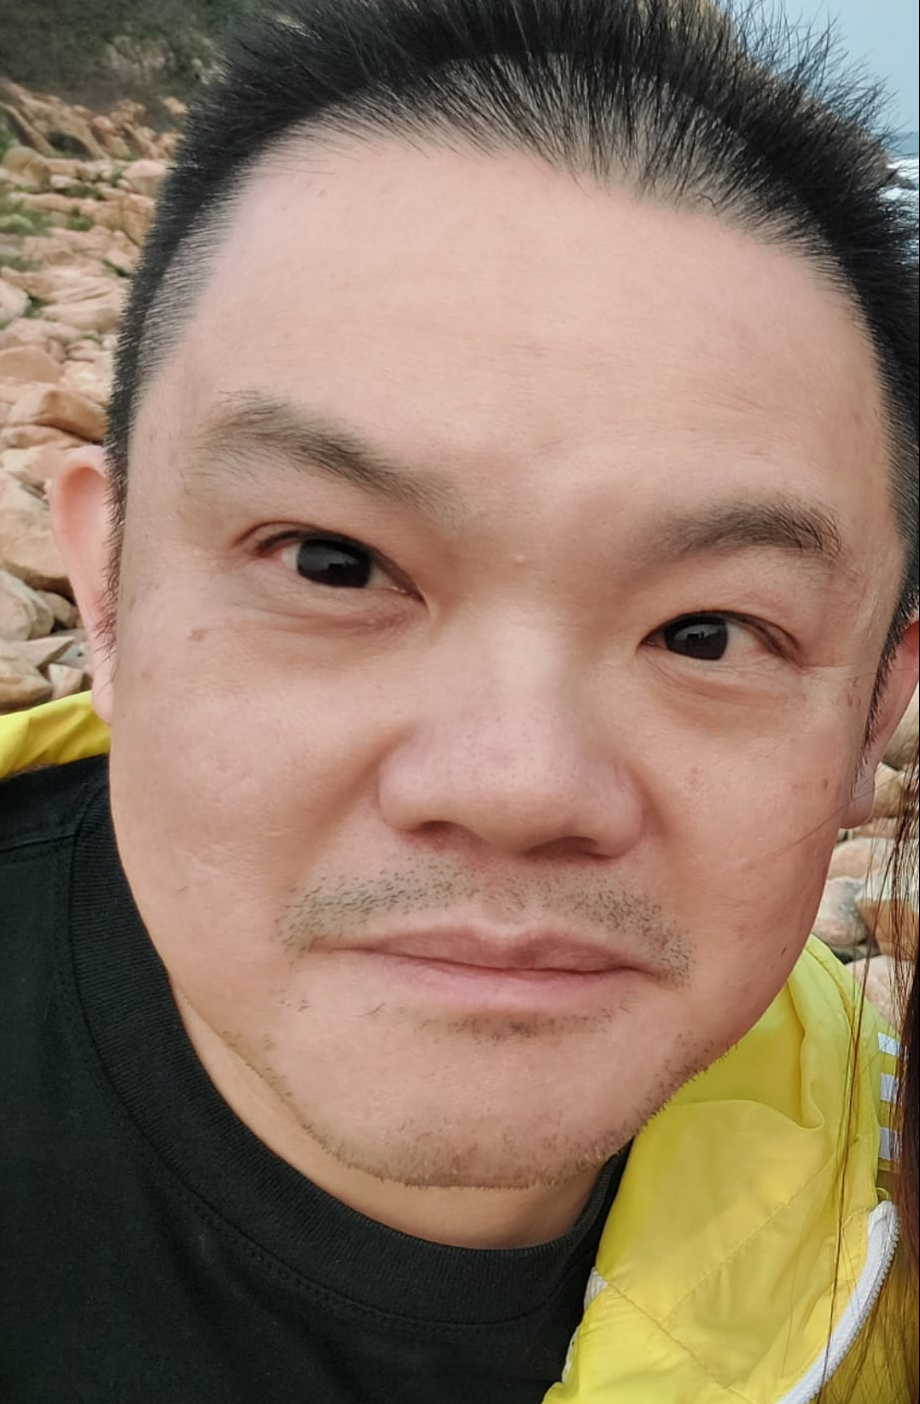 Leung Wai-tong, aged 52, is about 1.7 metres tall, 80 kilograms in weight and of fat build. He has a round face with yellow complexion and short black hair. He was last seen wearing a blue short sleeved T-shirt, beige trousers, black shoes and carrying a black shoulder bag.